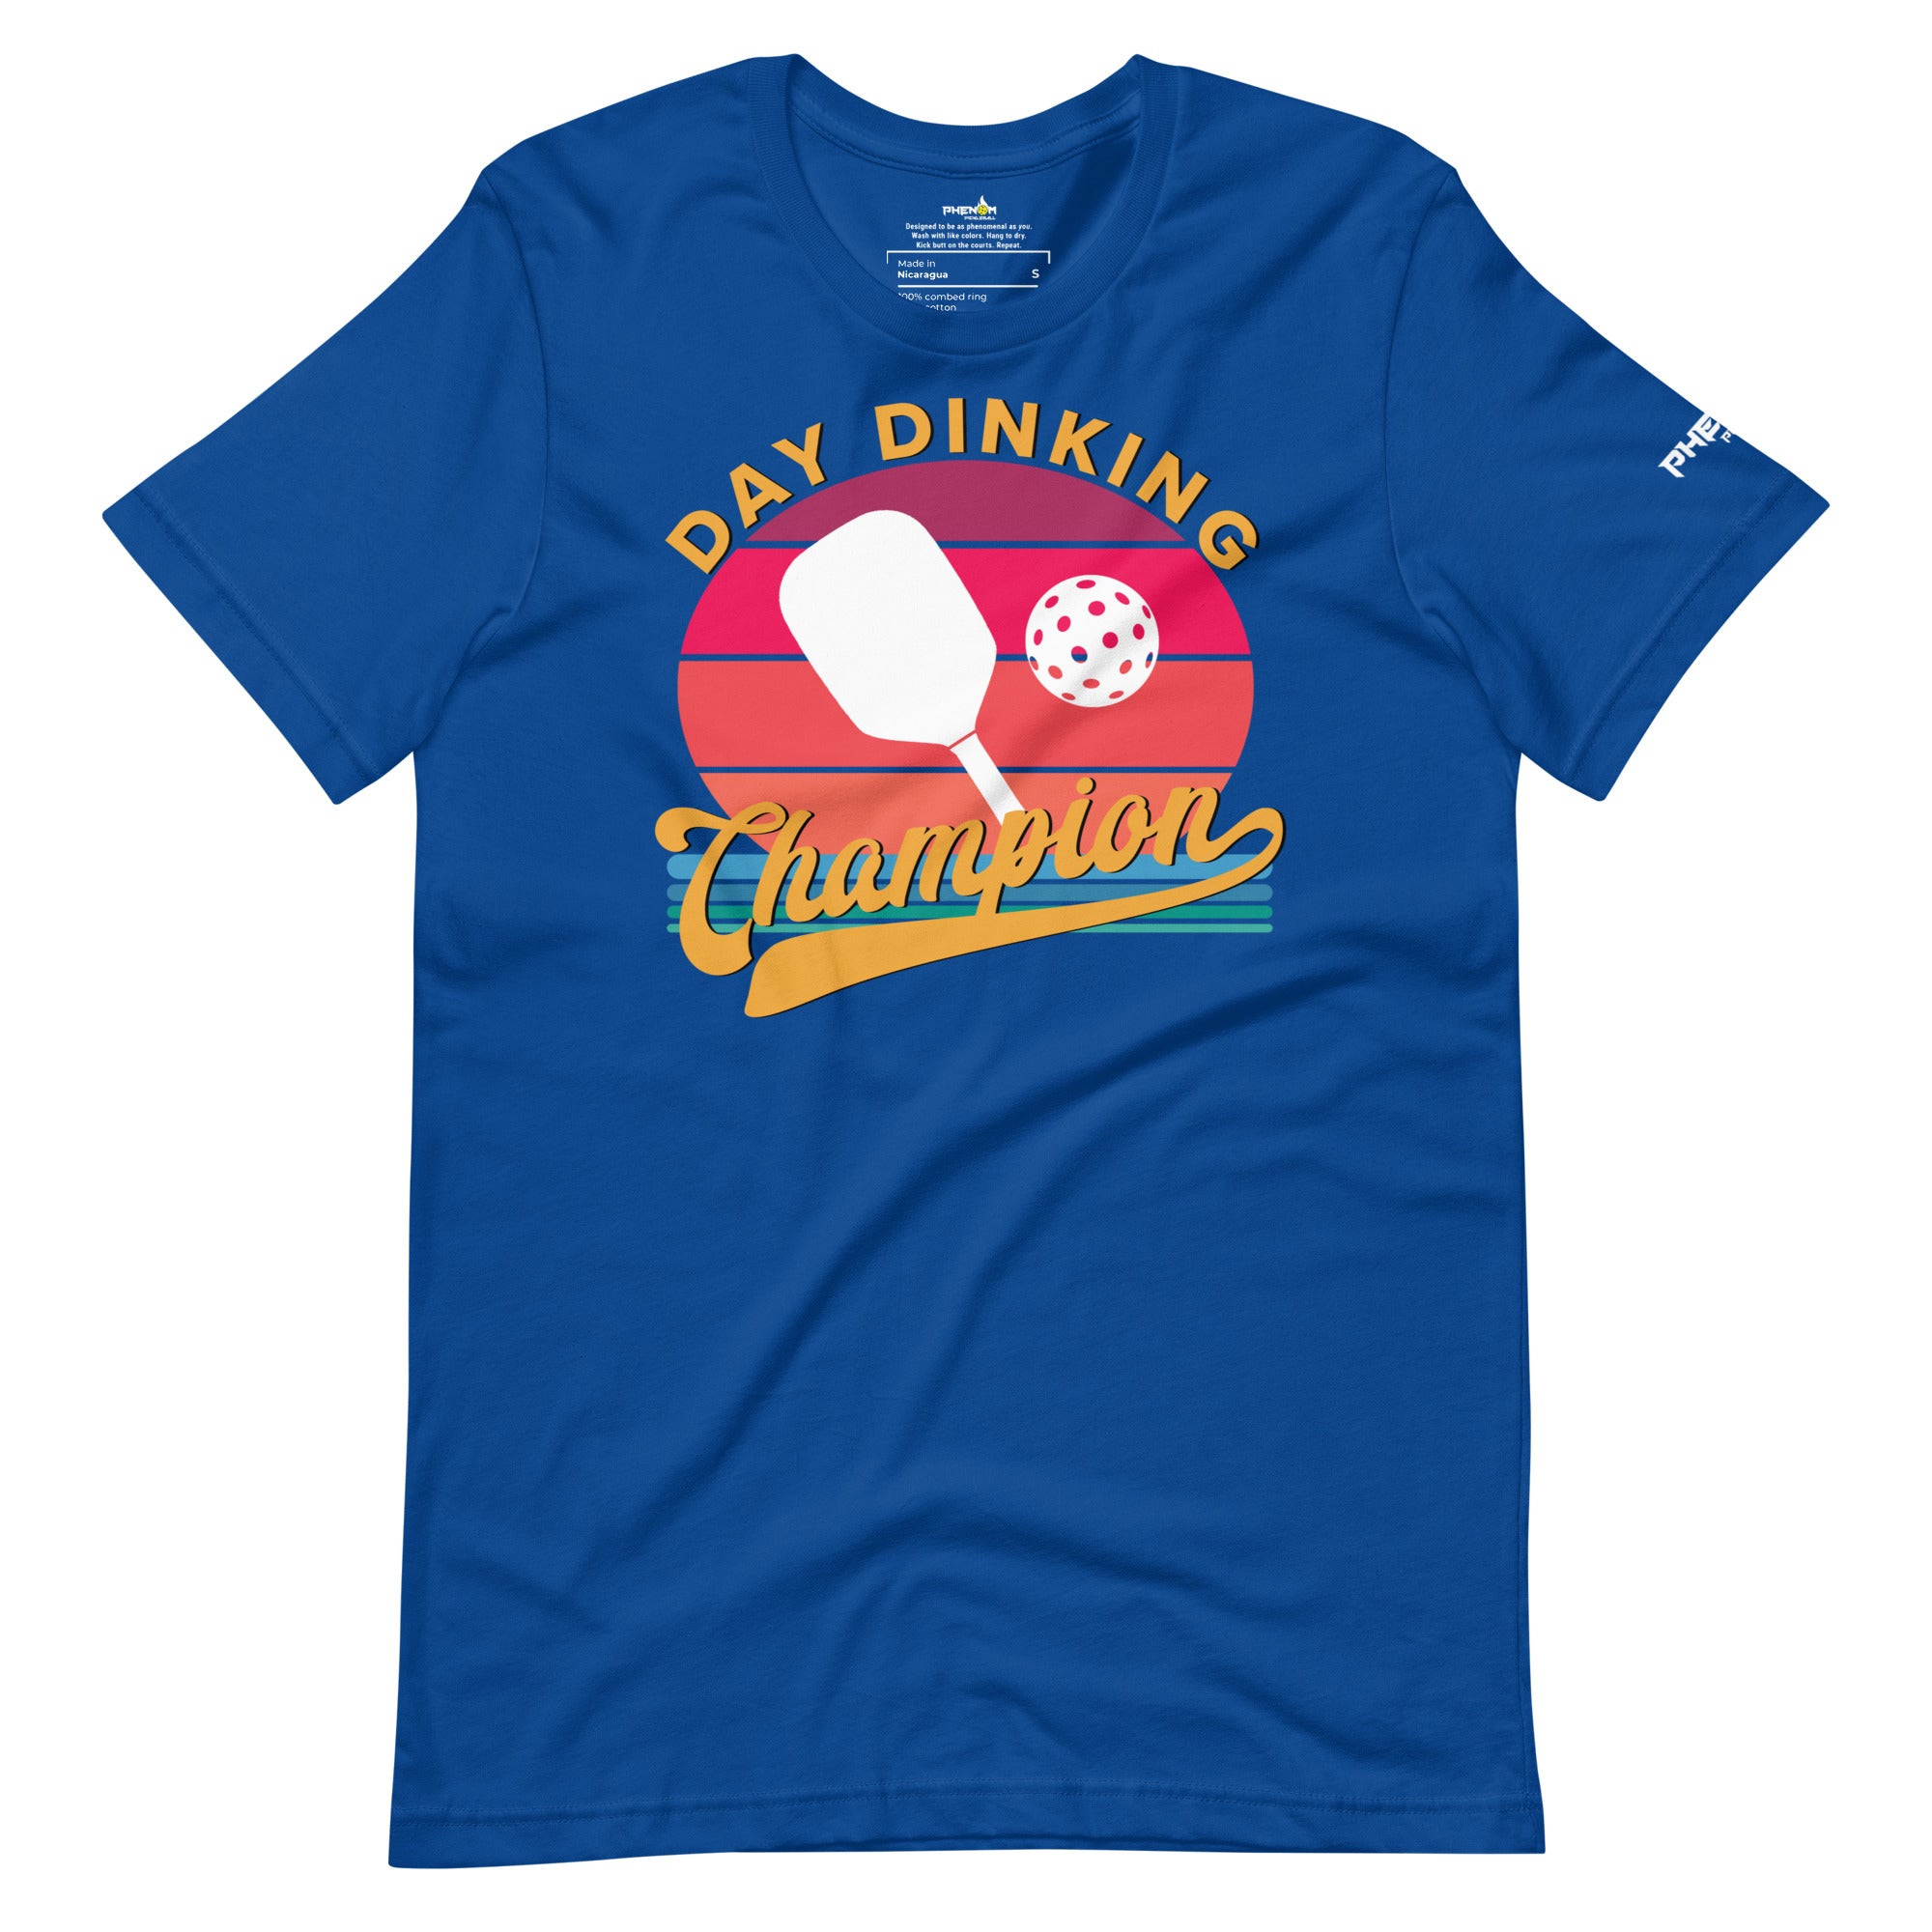 royal blue day dinking champion retro inspired pickleball shirt apparel front view